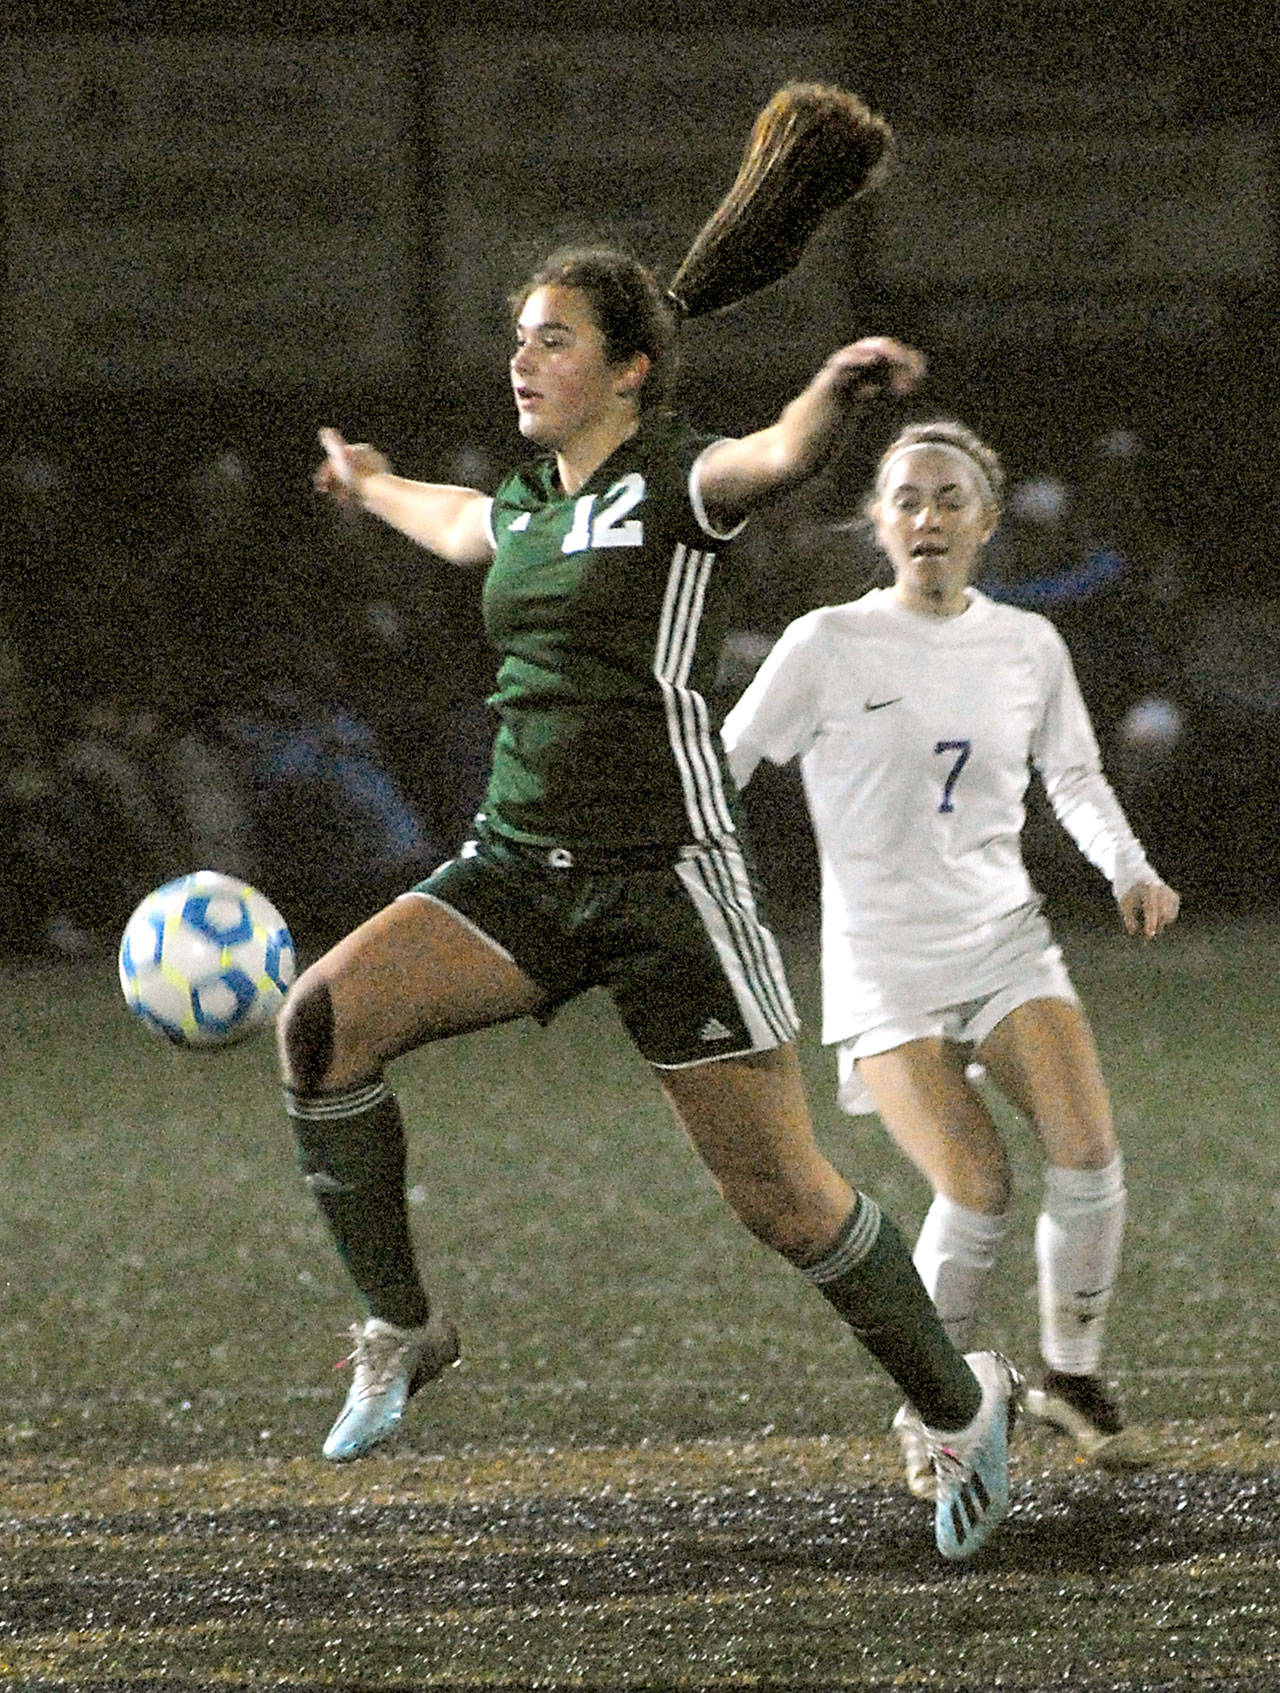 Port Angeles’ Eve Burke controls the ball in front of Sequims Daisy Ryan during a district playoff game at Peninsula College. (Keith Thorpe/Peninsula Daily News)